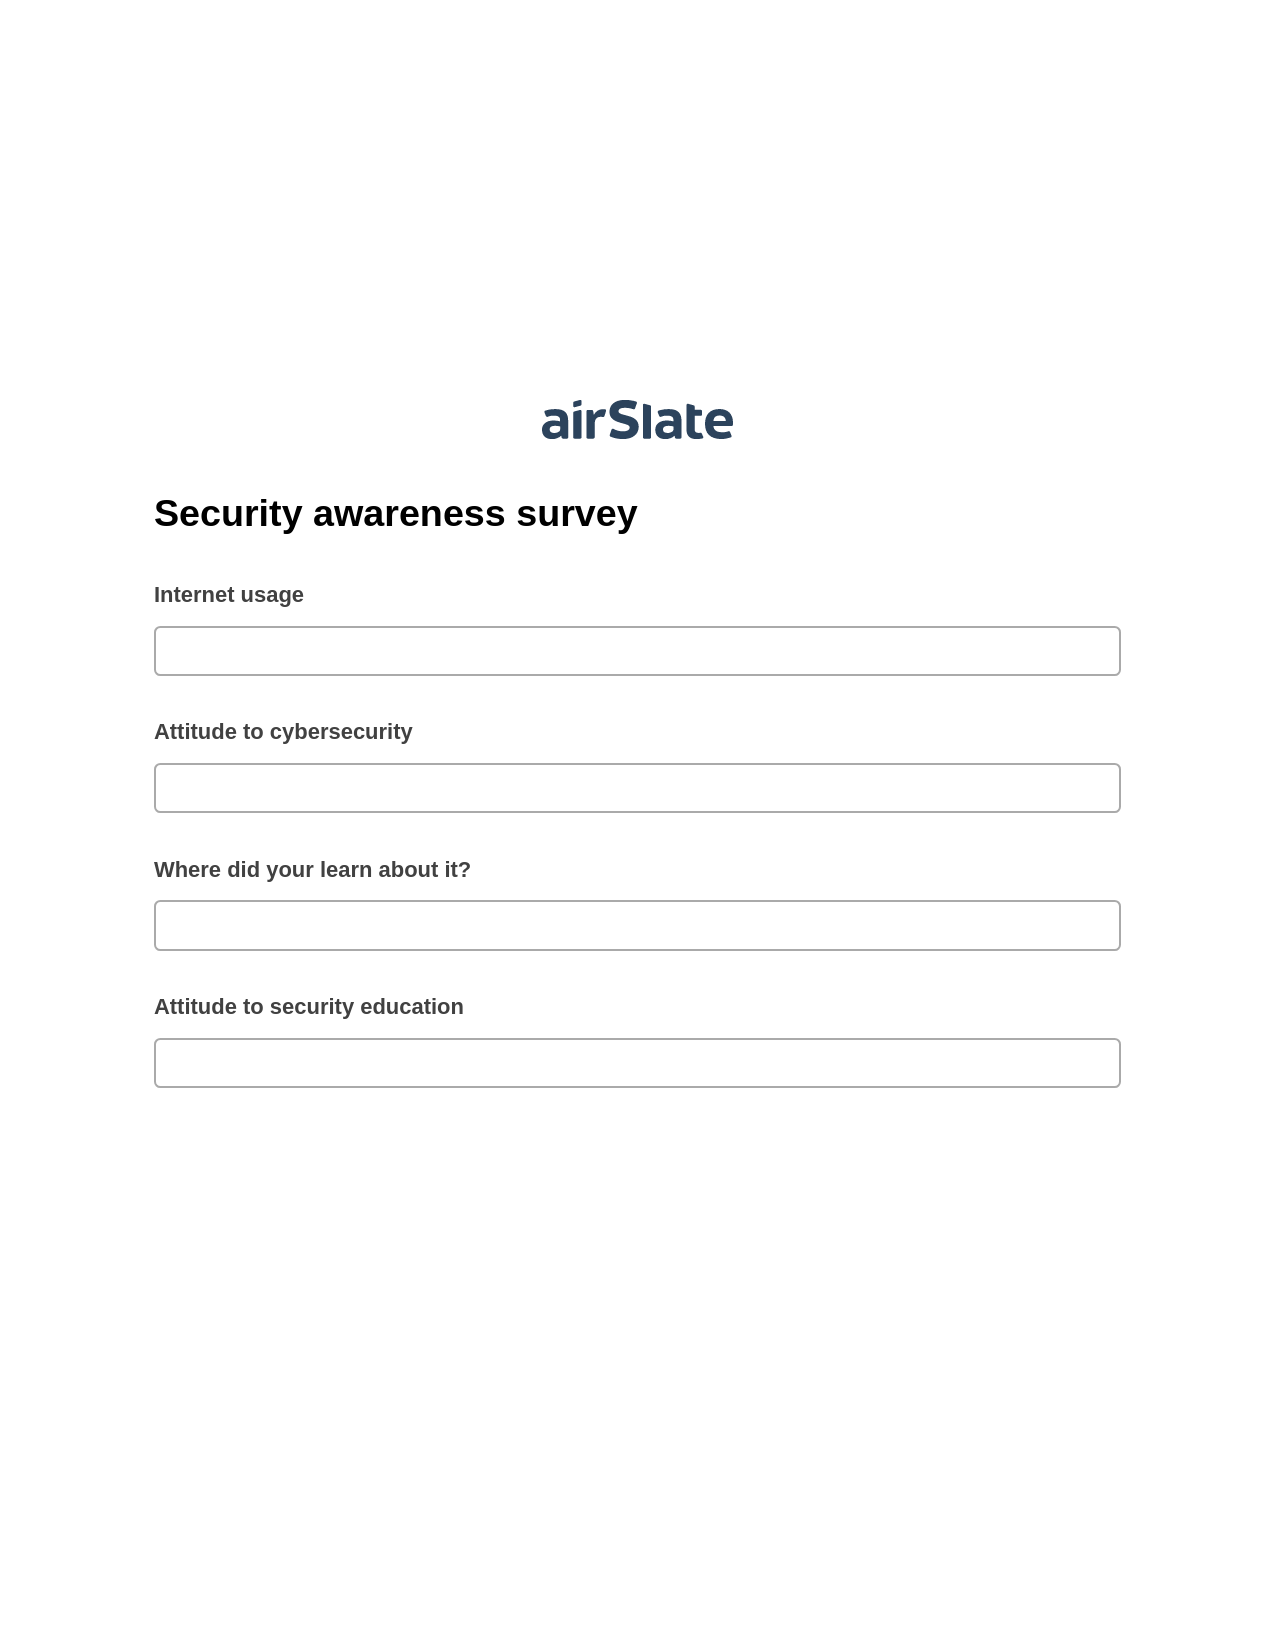 Security awareness survey Pre-fill from CSV File Dropdown Options Bot, Assign Slate Name Bot, Archive to SharePoint Folder Bot